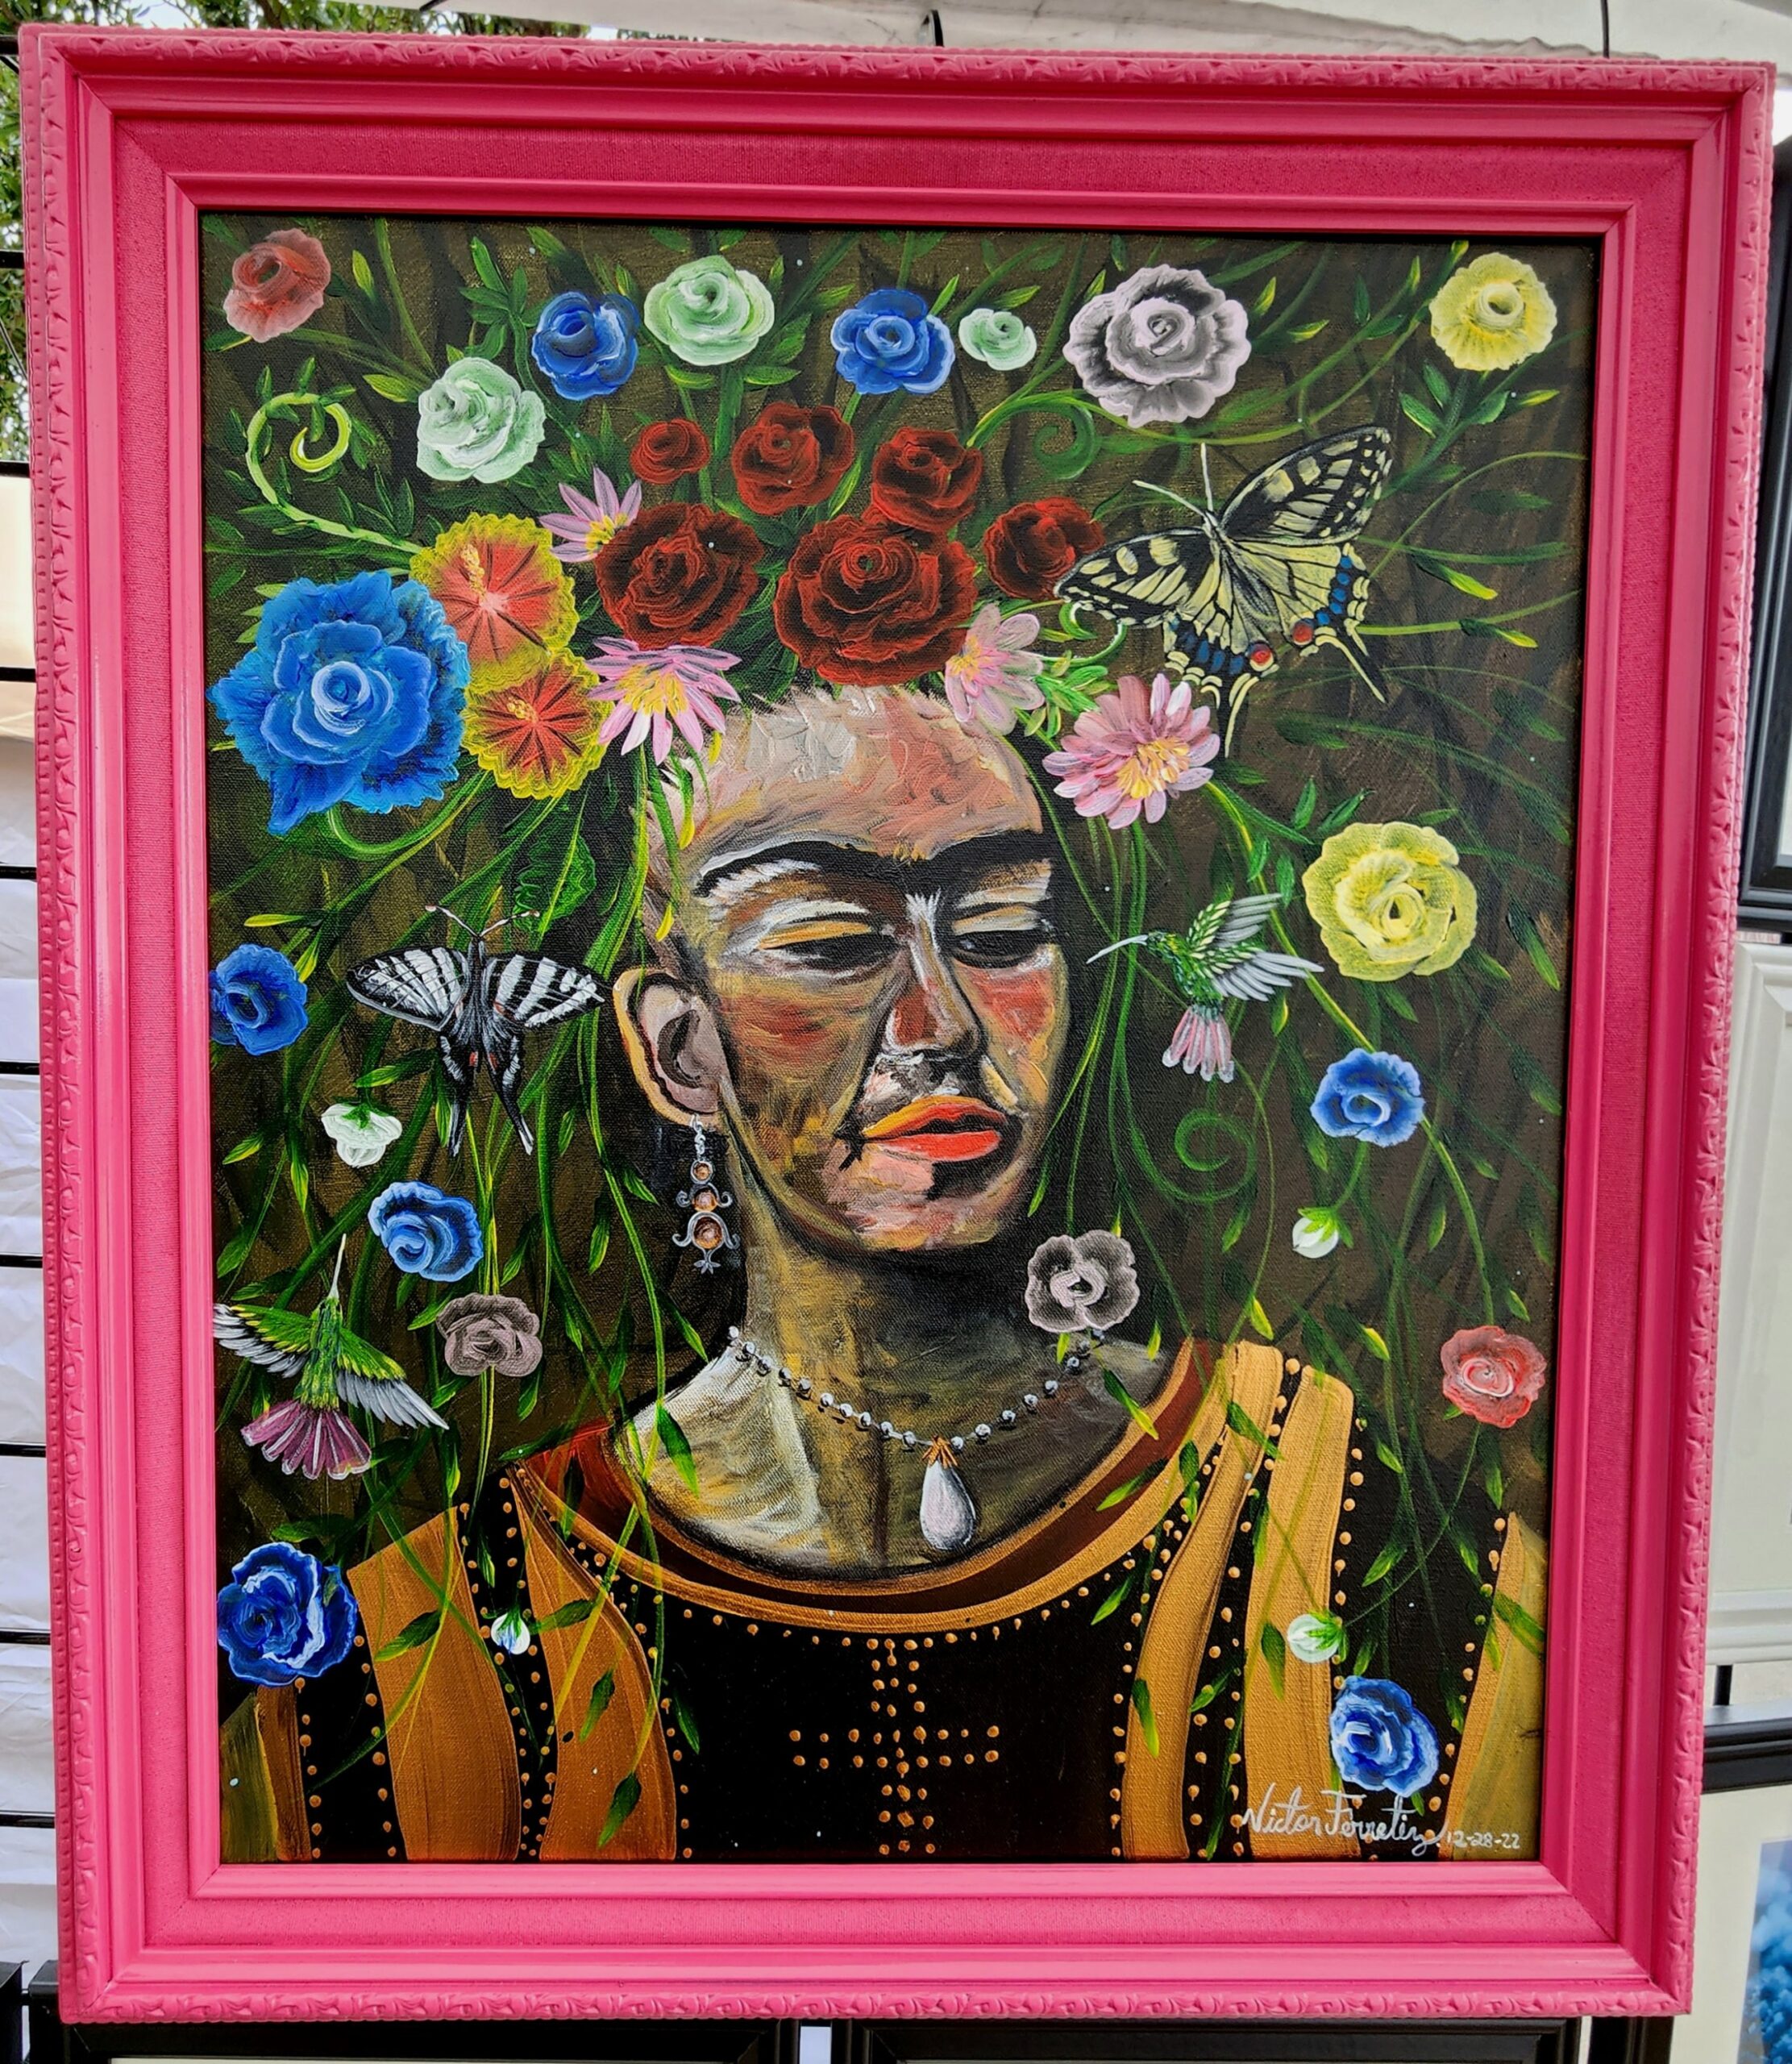 Abstract painting of the famous Mexican artist Frida Kahlo. Painted wooden frame. Painting size: 20"x24"